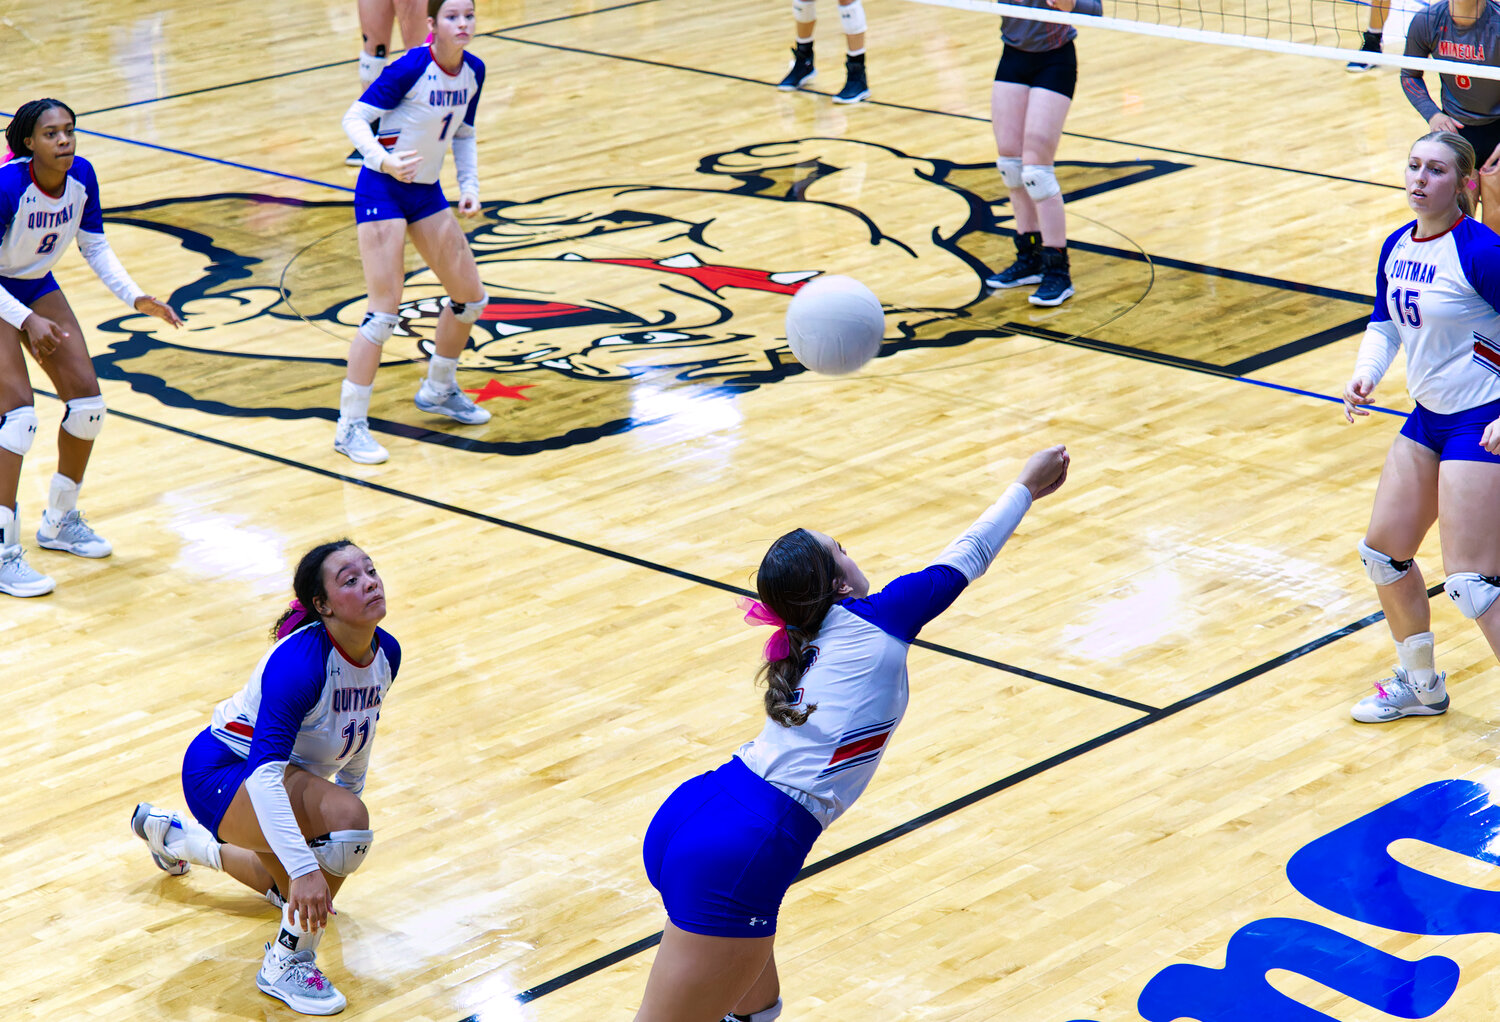 Kallie Hoover pays off Ashley Davis' dig with a recovery shot. [view more volleyball]